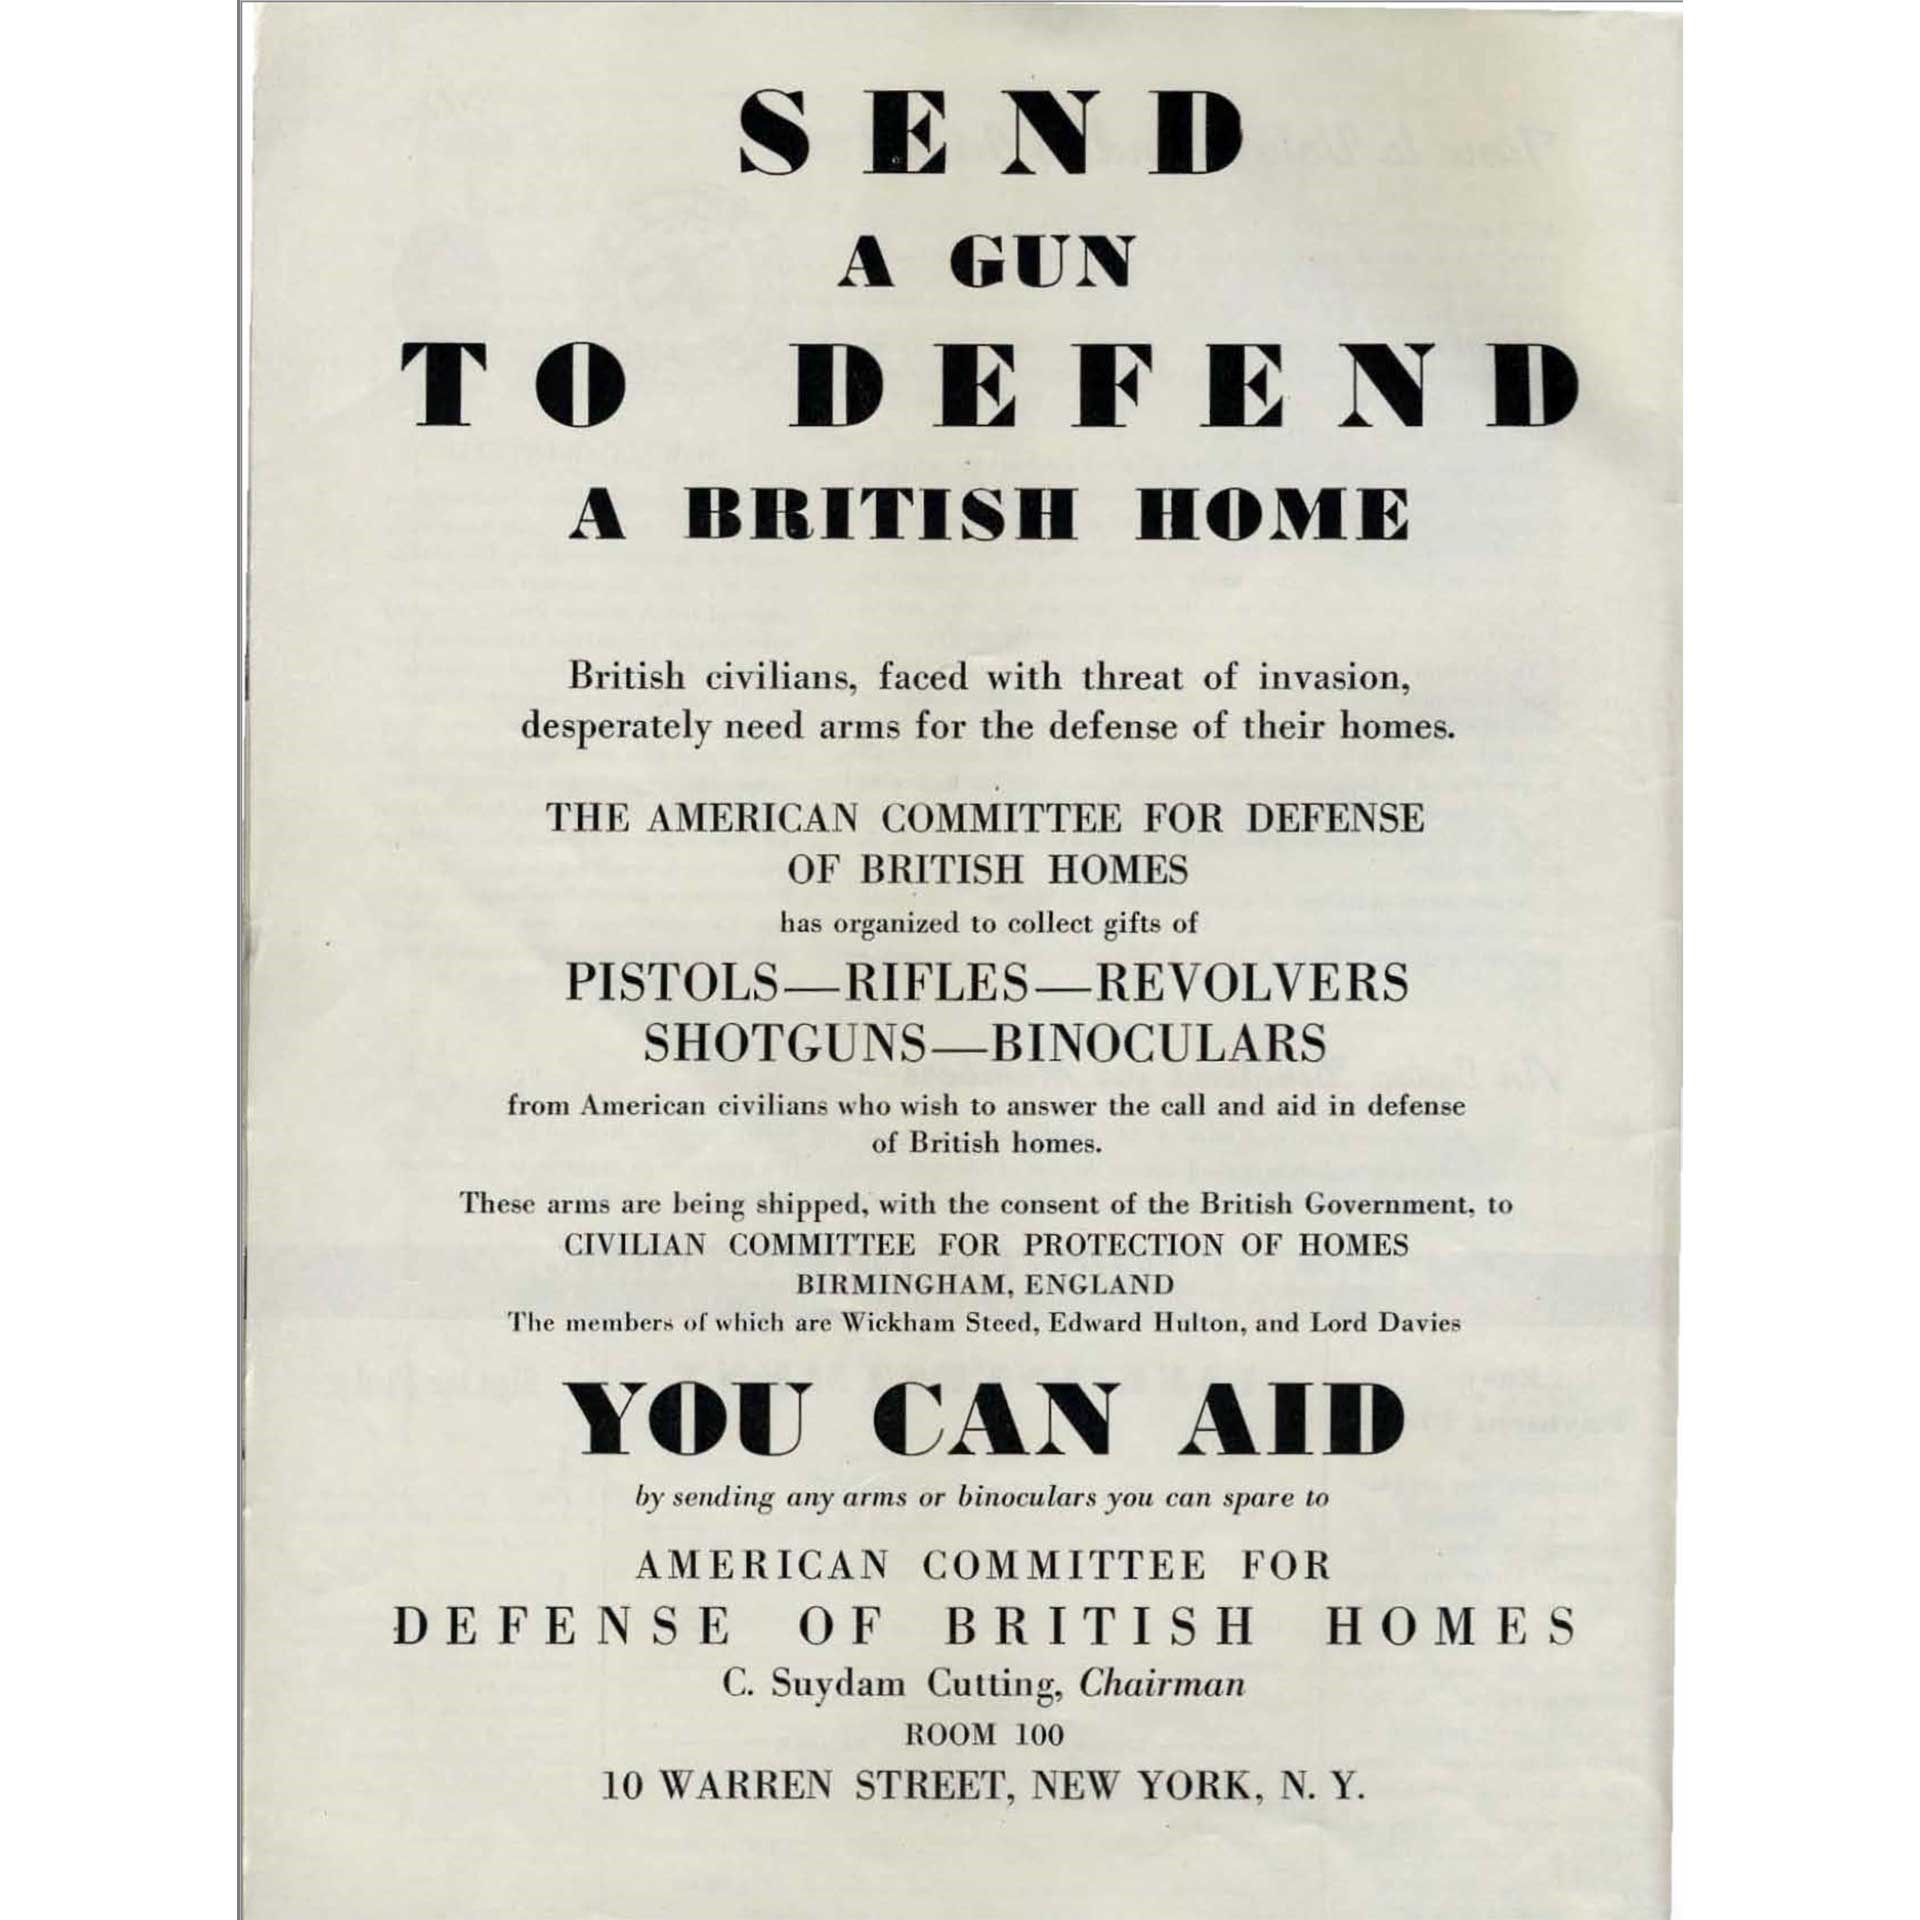 An advertisement in the November 1940 issue of American Rifleman asking readers to "Send A Gun To Defend A British Home."